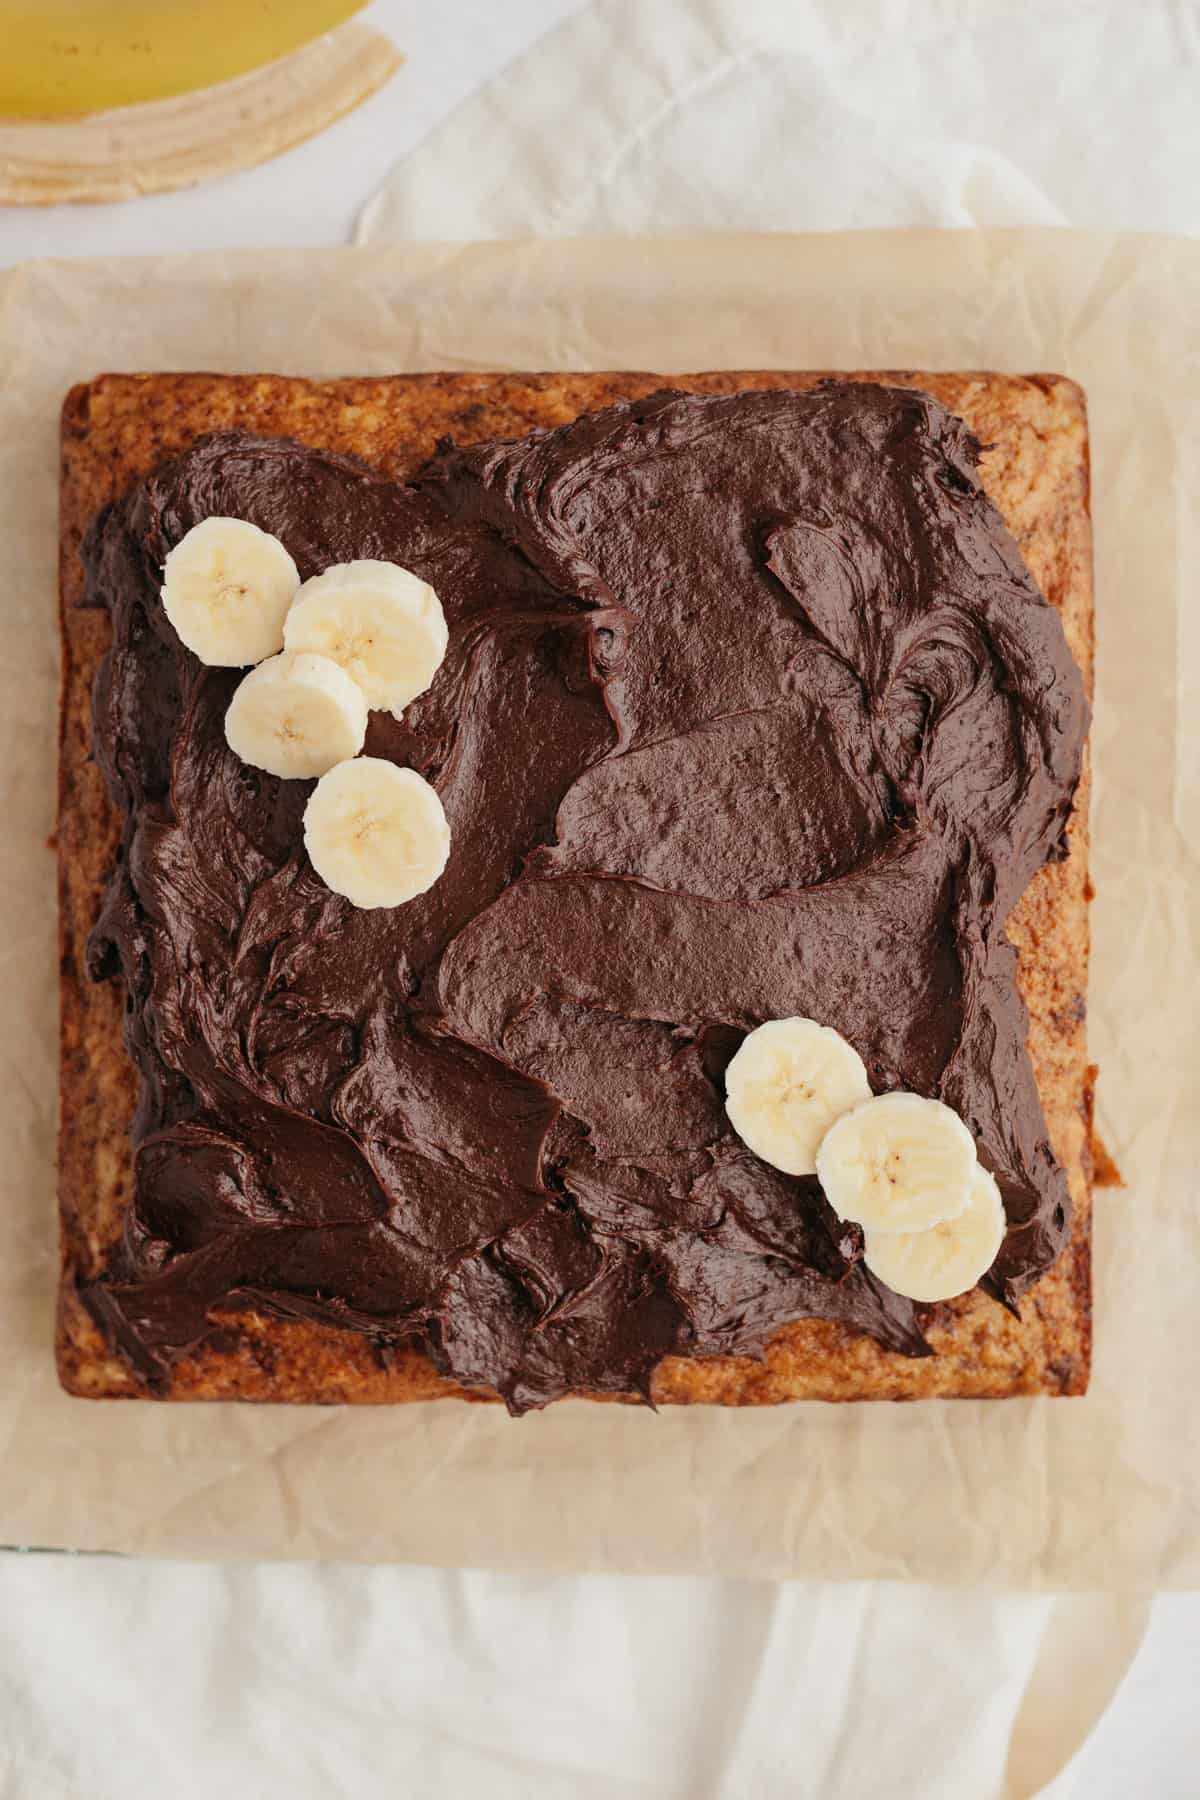 A square banana cake topped with chocolate frosting and banana slices.